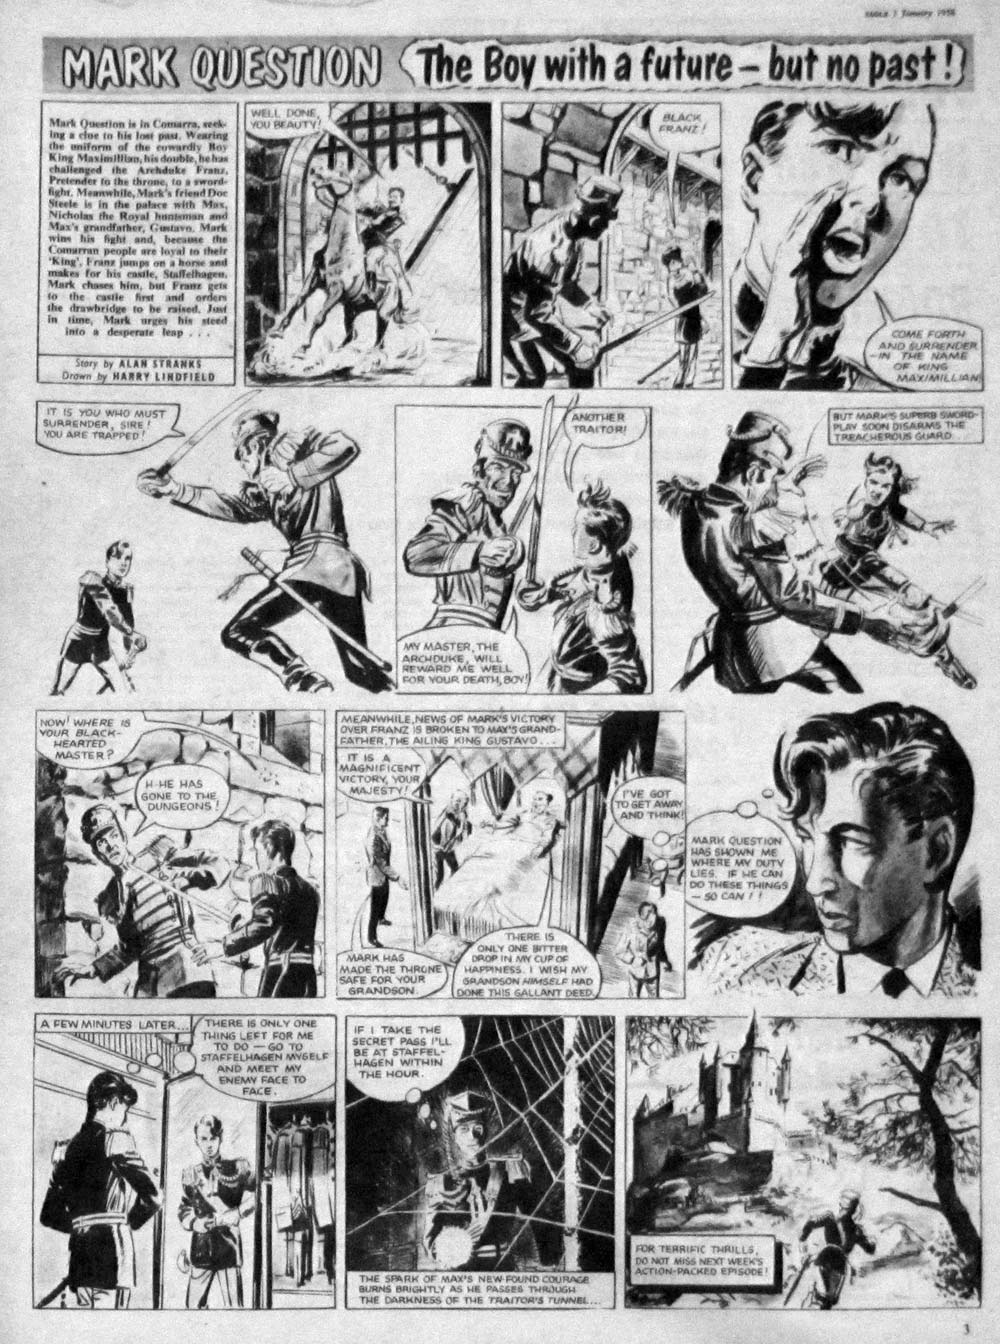 an old book page shows several comics, one depicting a man being stabbed by a woman